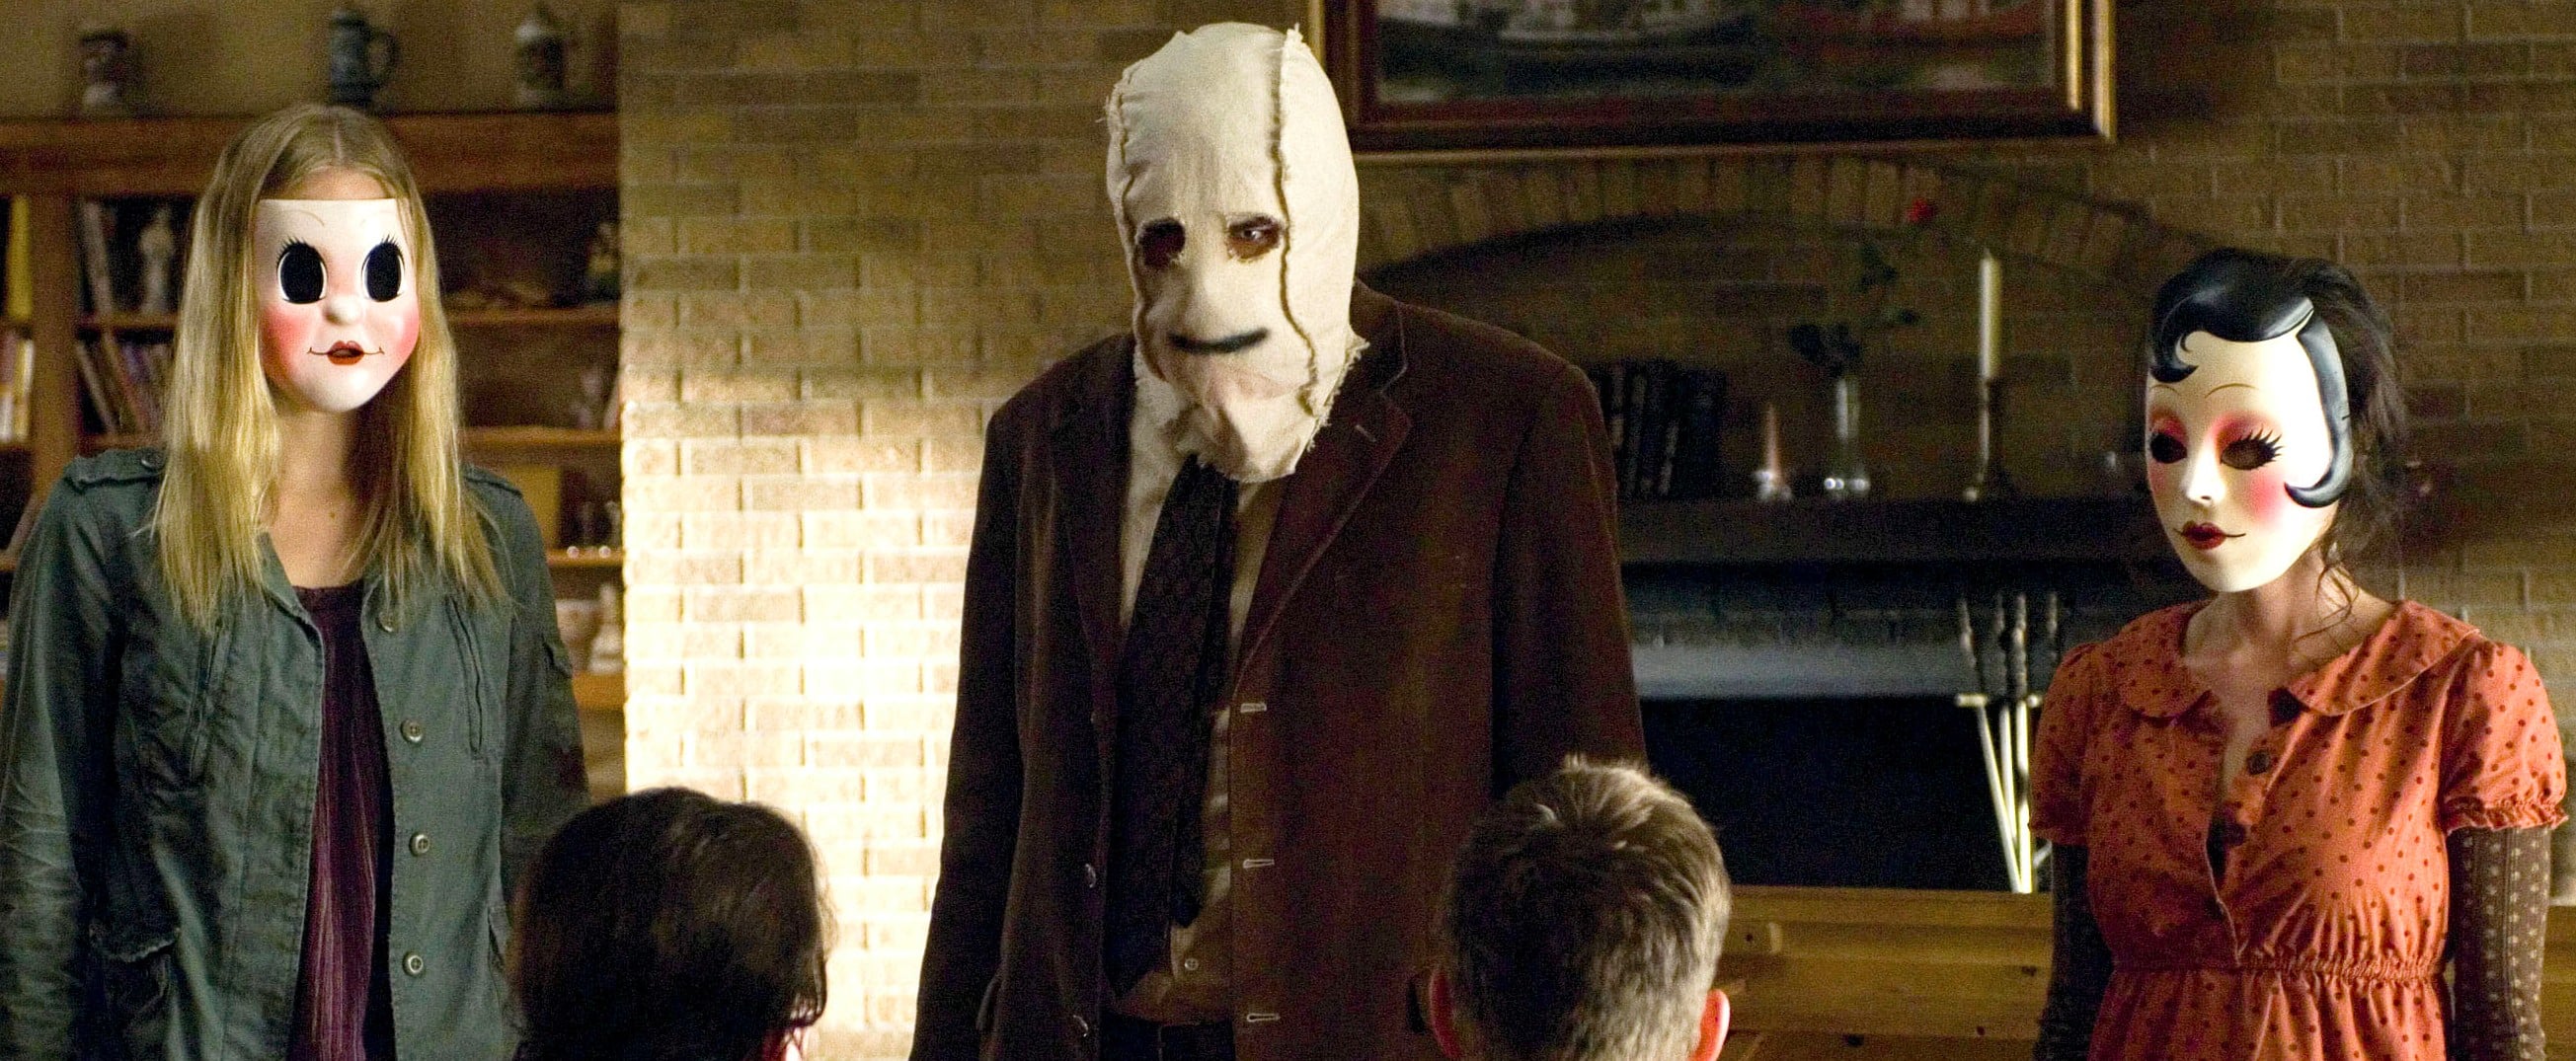 3 Disturbing Real-Life Stories That Inspired 'The Strangers' - iHorror